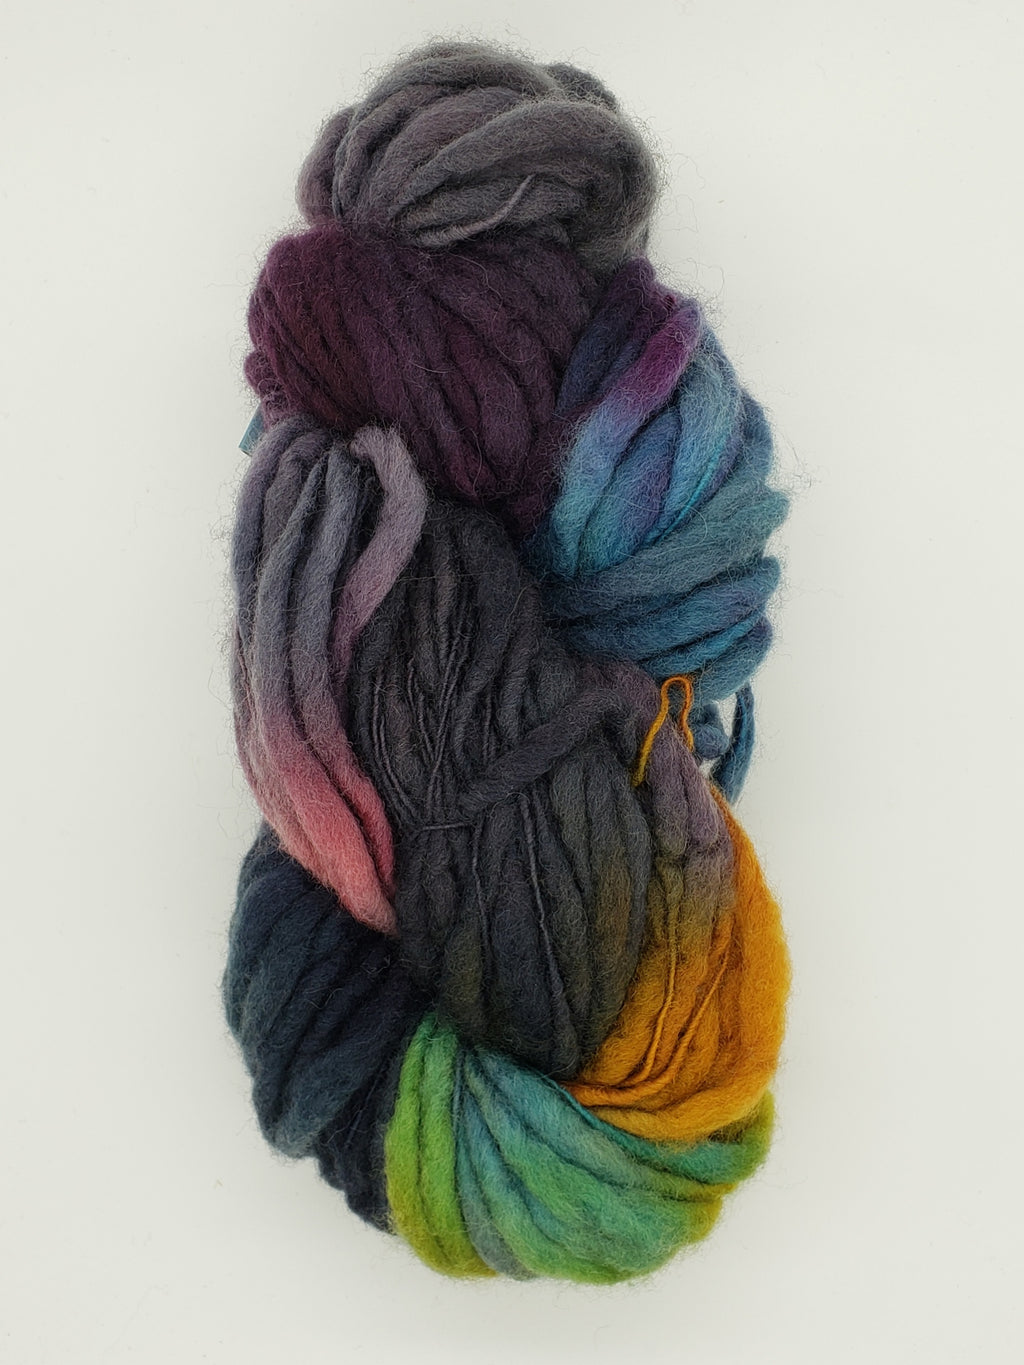 Slubby - COSMOS  -  Merino/Blue Face Leicester - Hand Dyed Textured Yarn Thick and Thin  - Variegated Shades